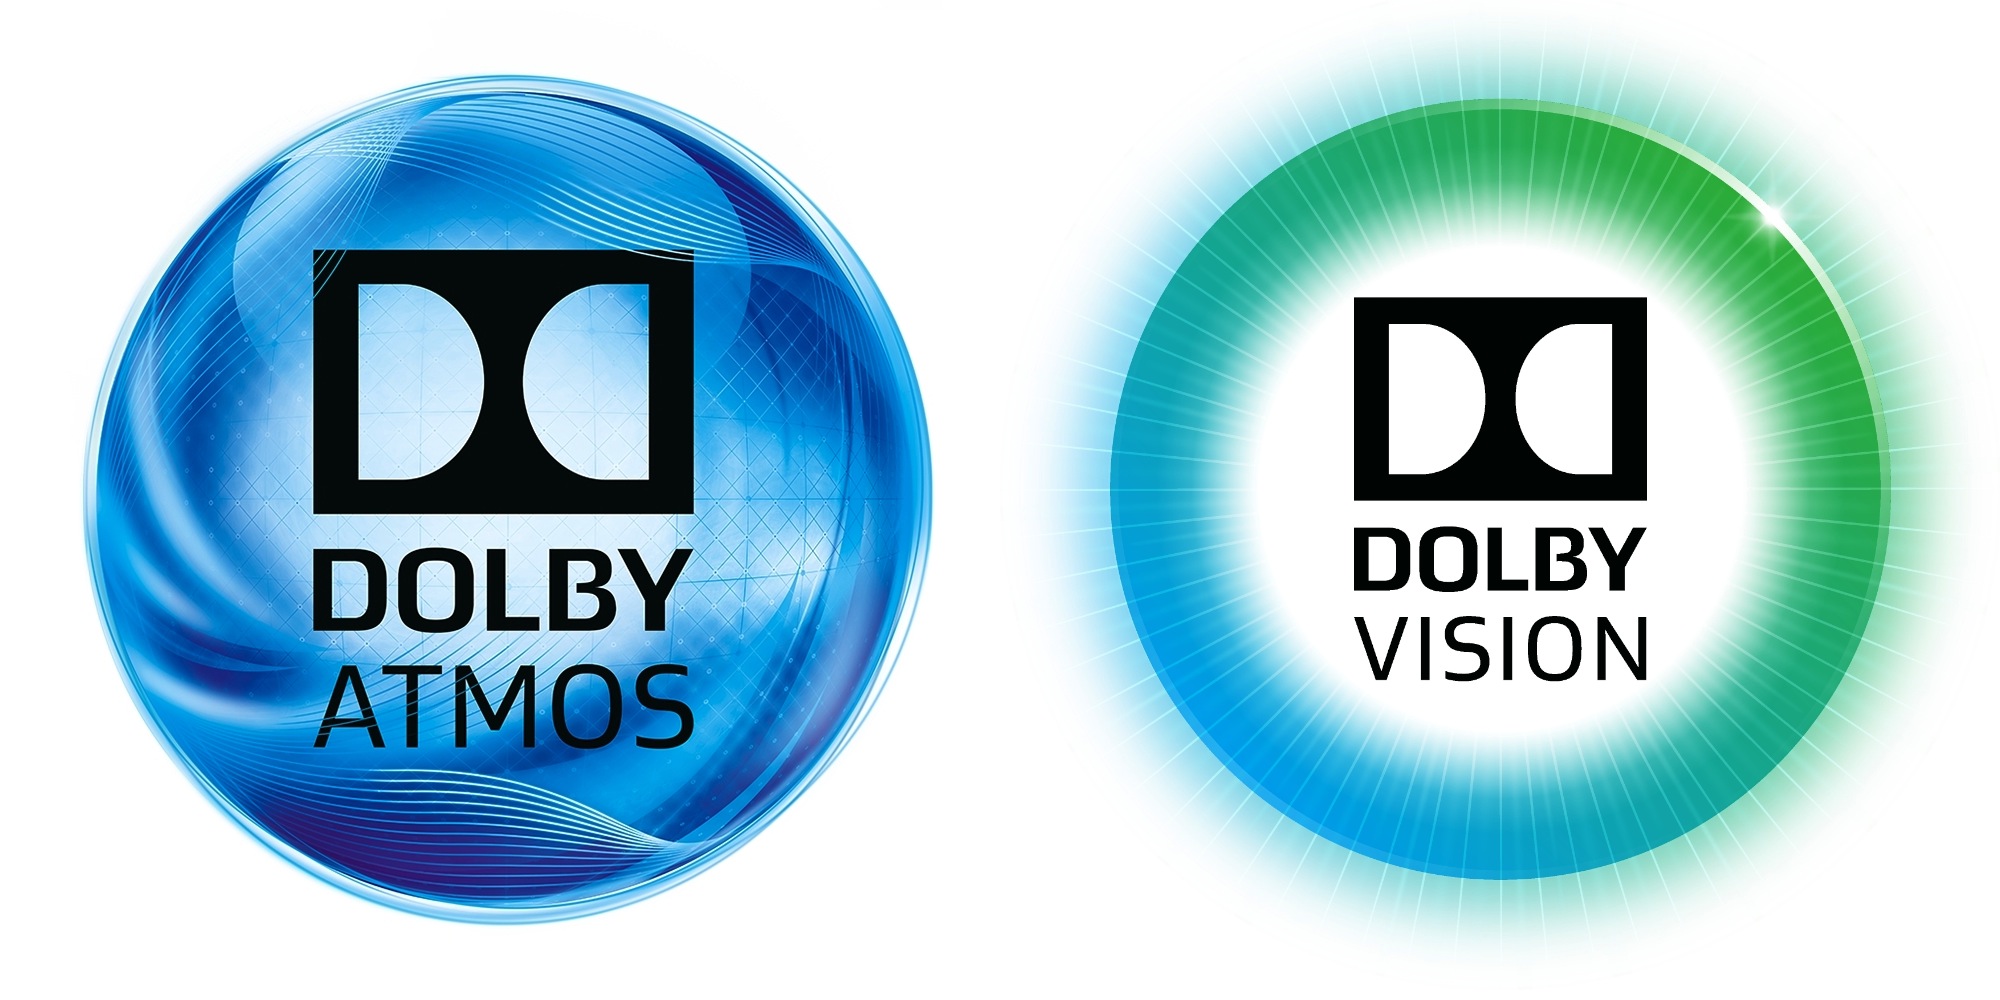 Dolby Atmos and Vision